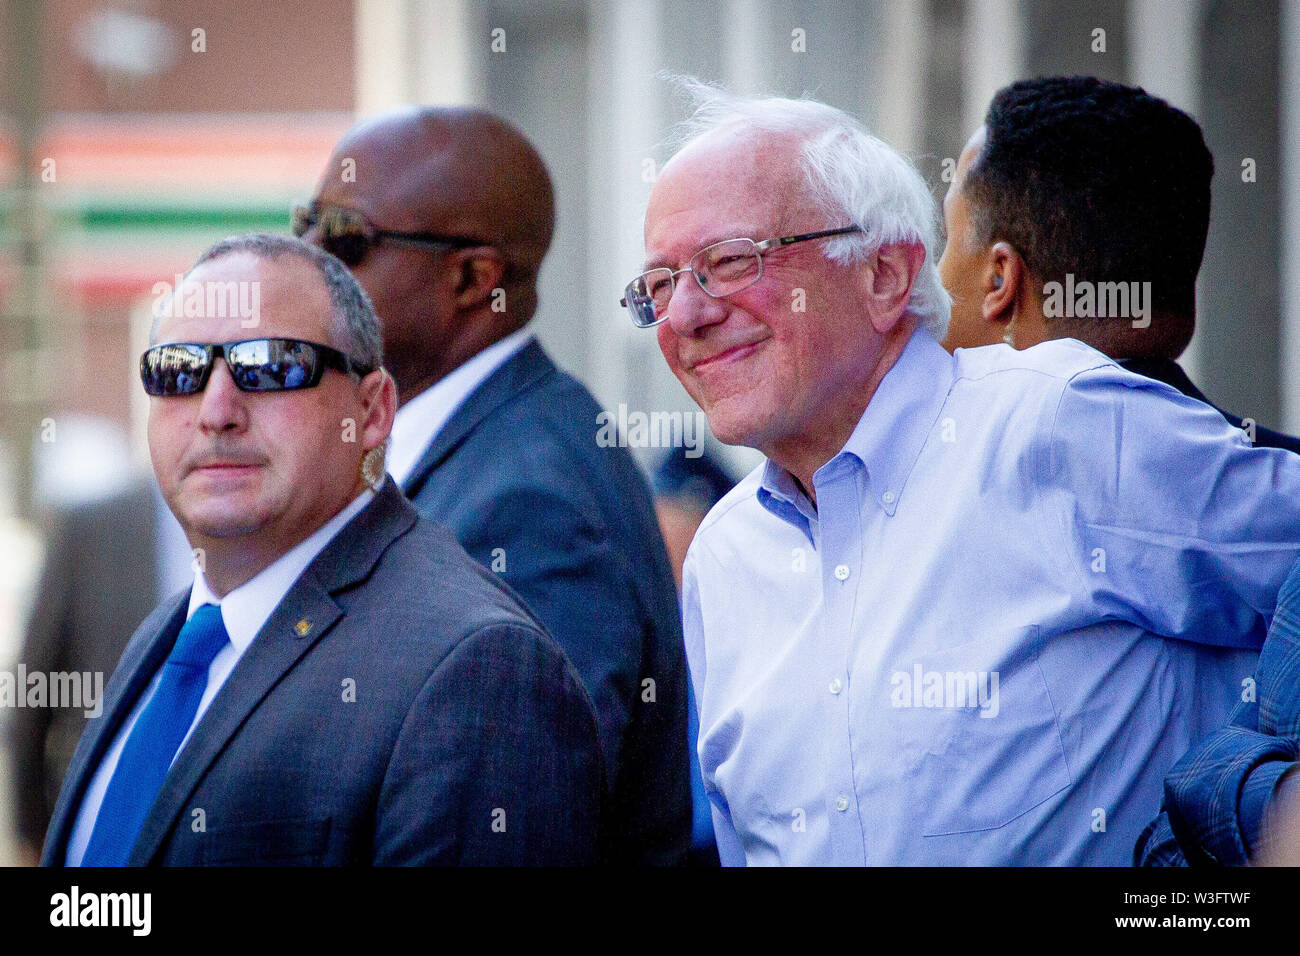 Philadelphia, Pennsylvania, USA. 15th July, 2019. July 15, 2019 - Senator Bernie Sanders arrives at a rally gathered to protest the closure of Hahnemann University Hospital in Philadelphia, PA, July 15, 2019. Hahnemann, a busy urban healthcare center, is facing imminent closure after being acquired by a hedge fund that is looking to raze the building and turn the land into rental or retail properties. (Credit Image: © Michael CandeloriZUMA Wire) Credit: ZUMA Press, Inc./Alamy Live News Stock Photo